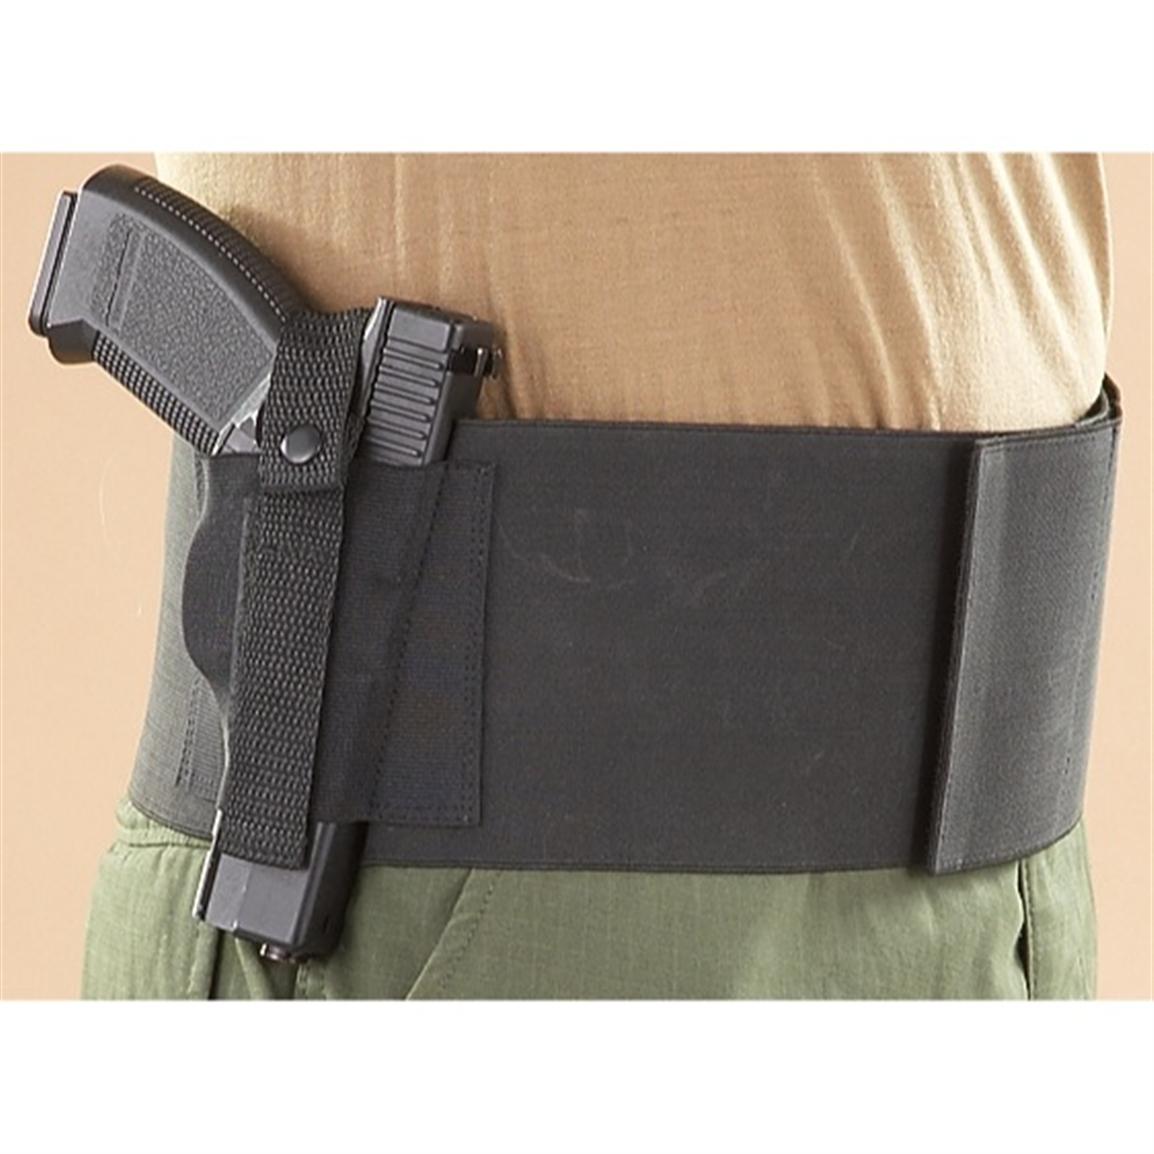 Belly Band with 2 Mag Pouches, Black